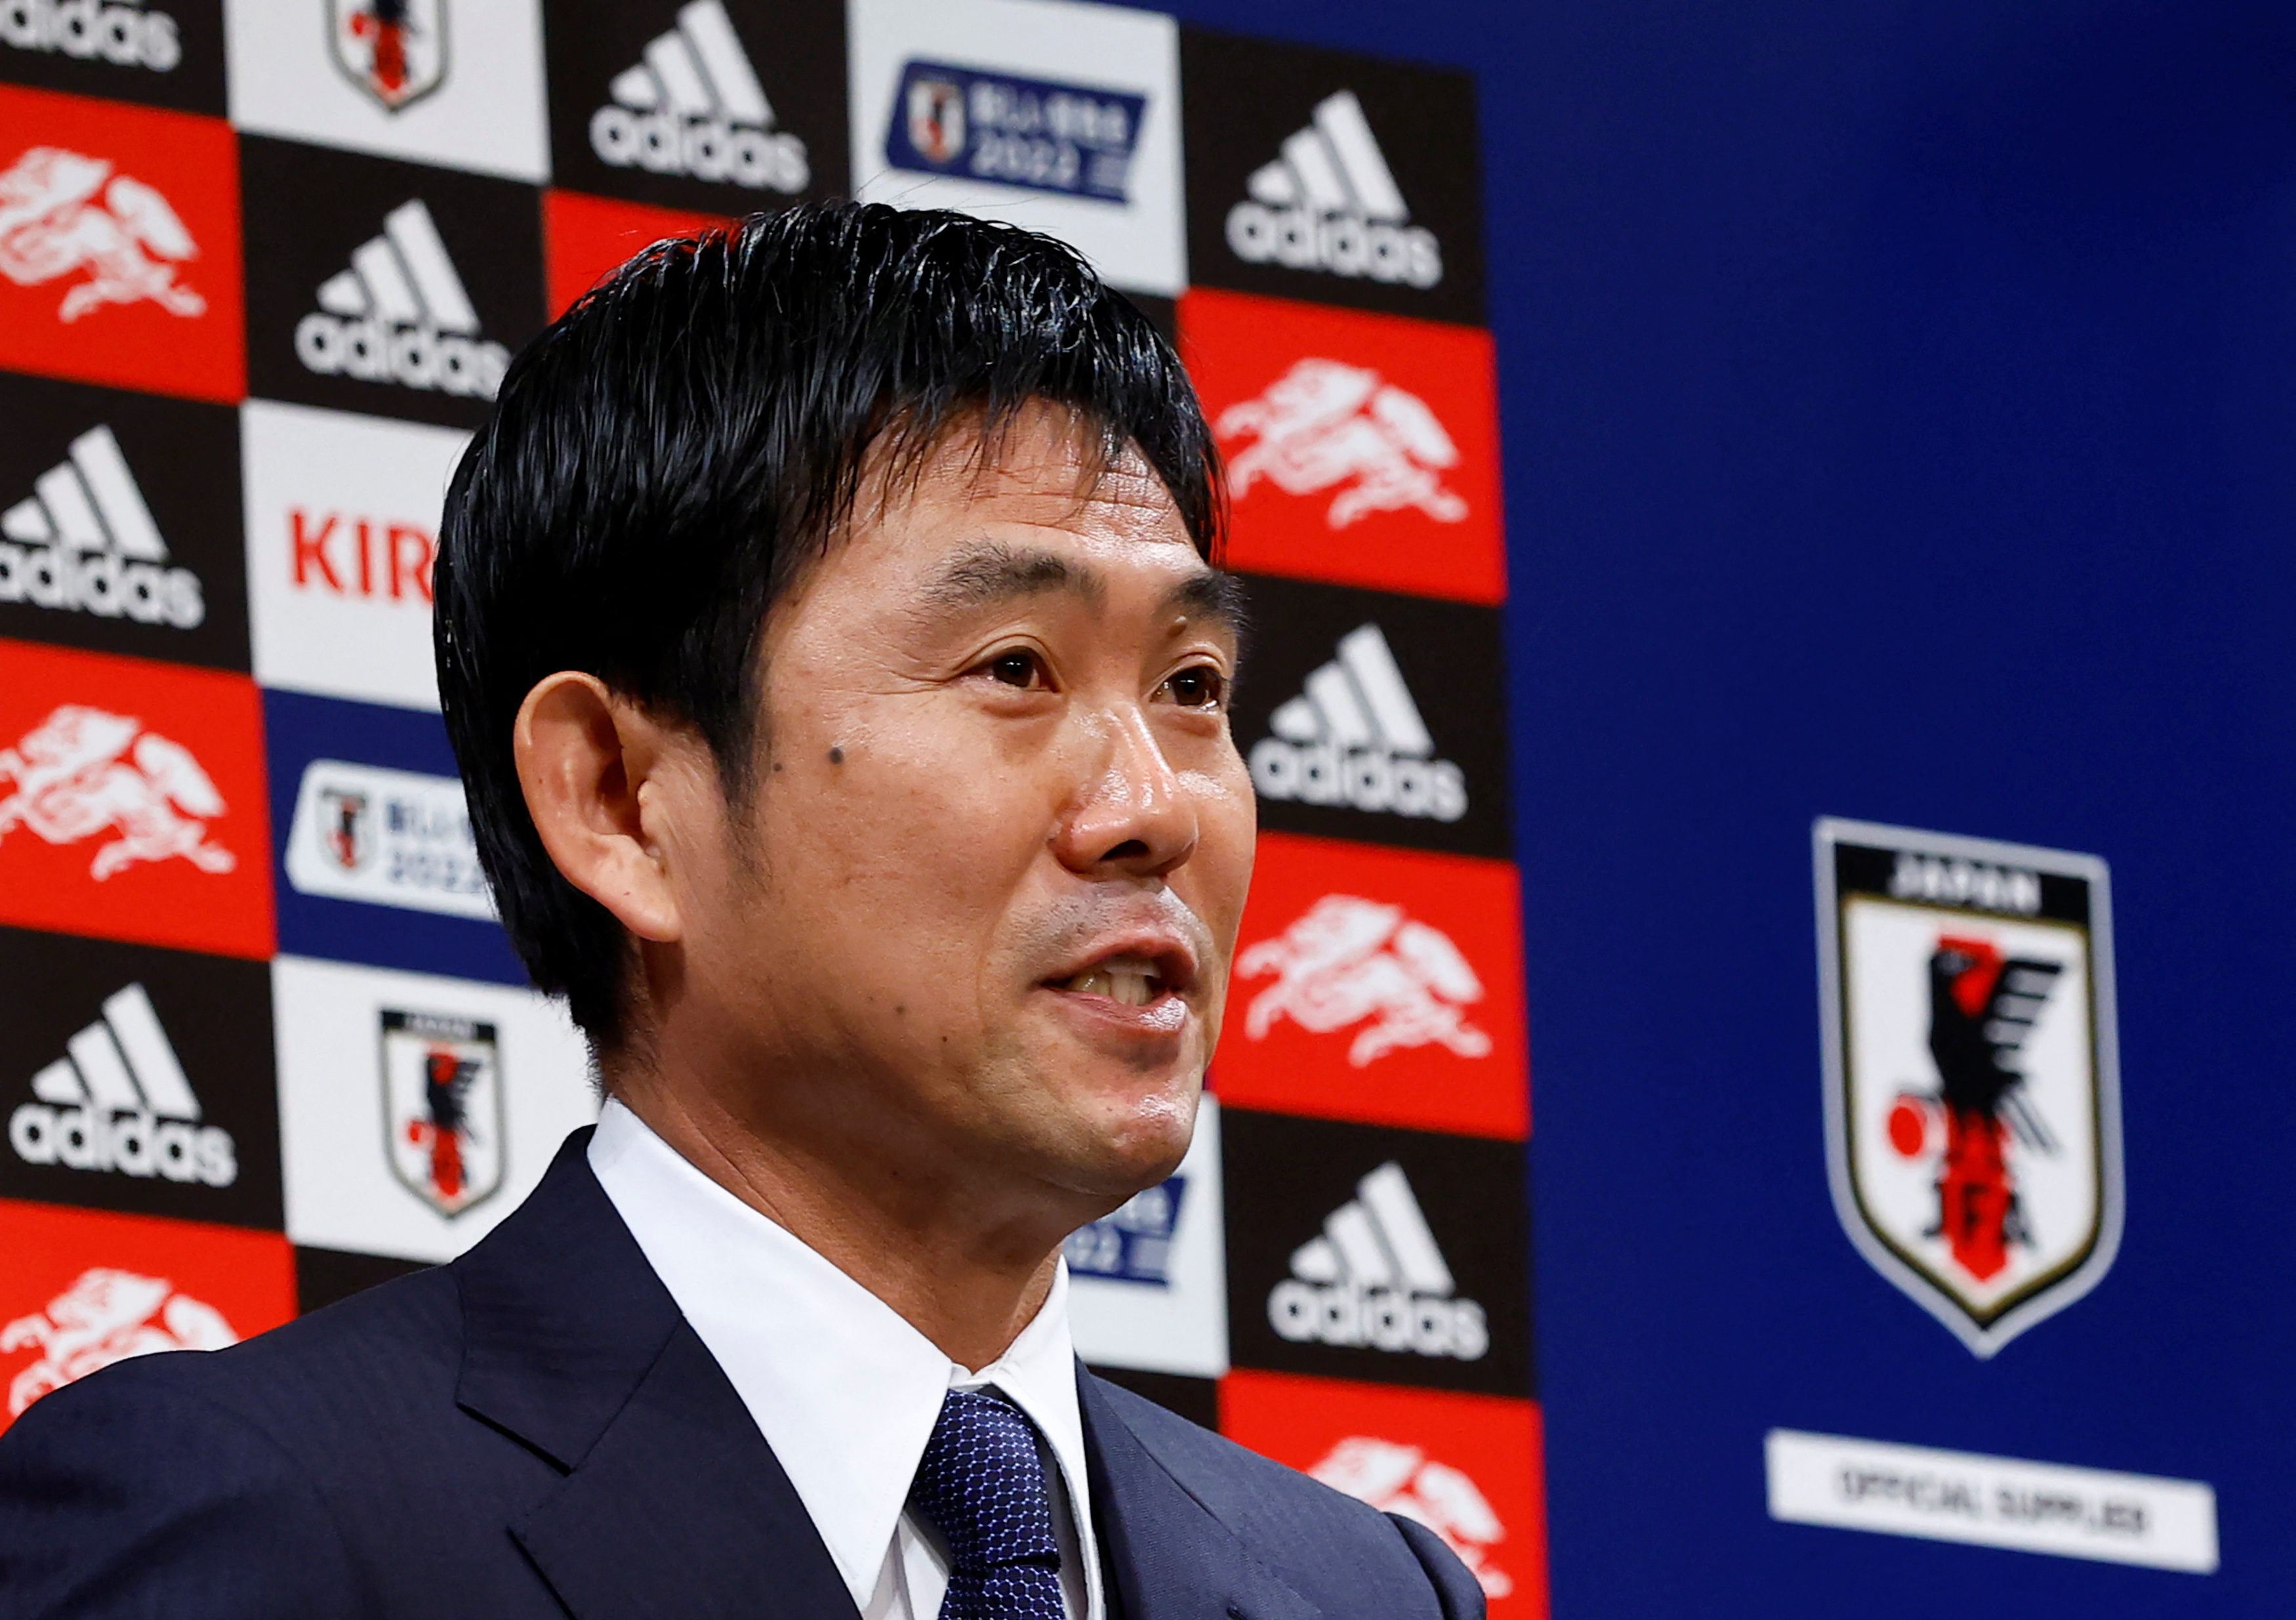 Japanese national soccer team’s head coach Hajime Moriyasu speaks at a news conference to name the squad for the 2022 Qatar World Cup, in Tokyo